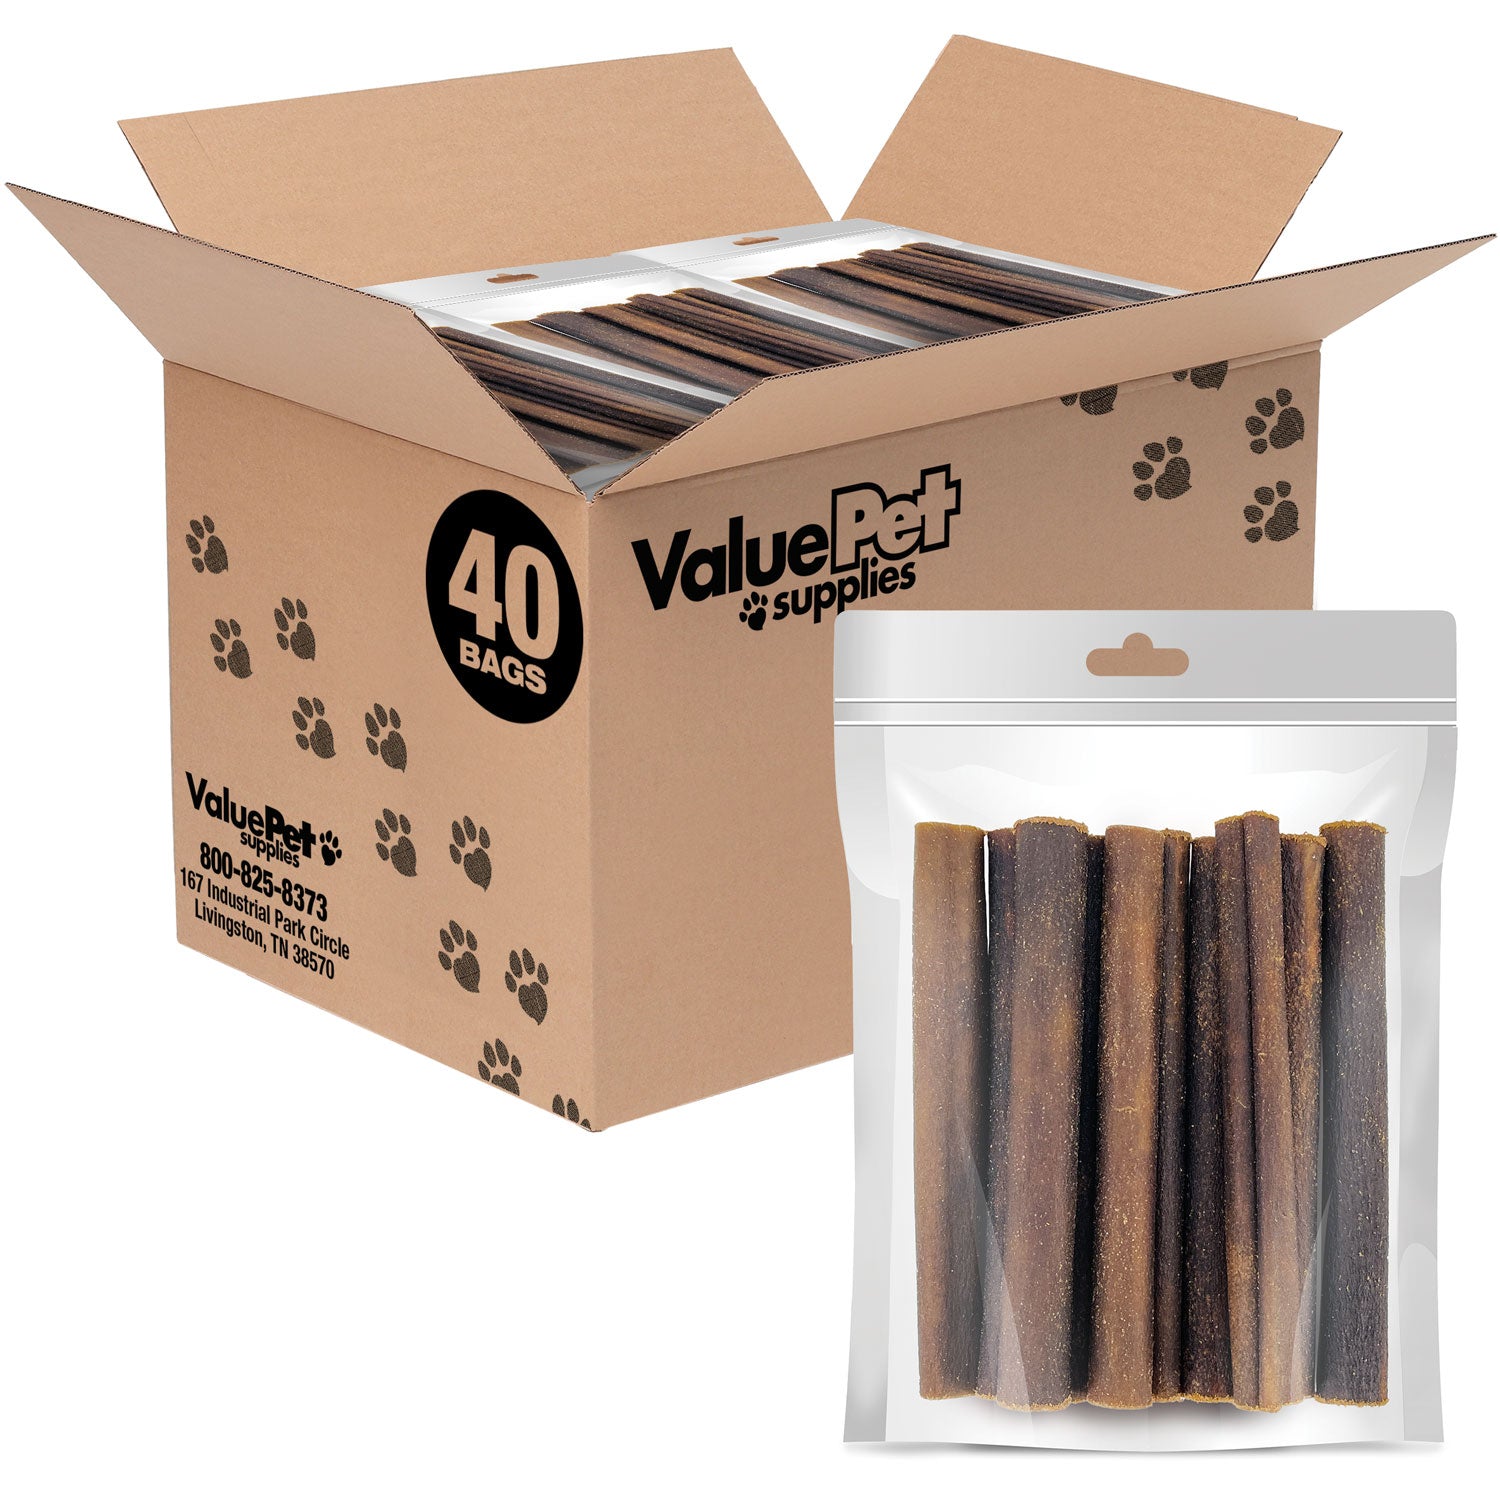 ValueBull USA Collagen Sticks, Premium Beef Dog Chews, 6" Thick, 400 Count RESALE PACKS (40 x 10 Count)